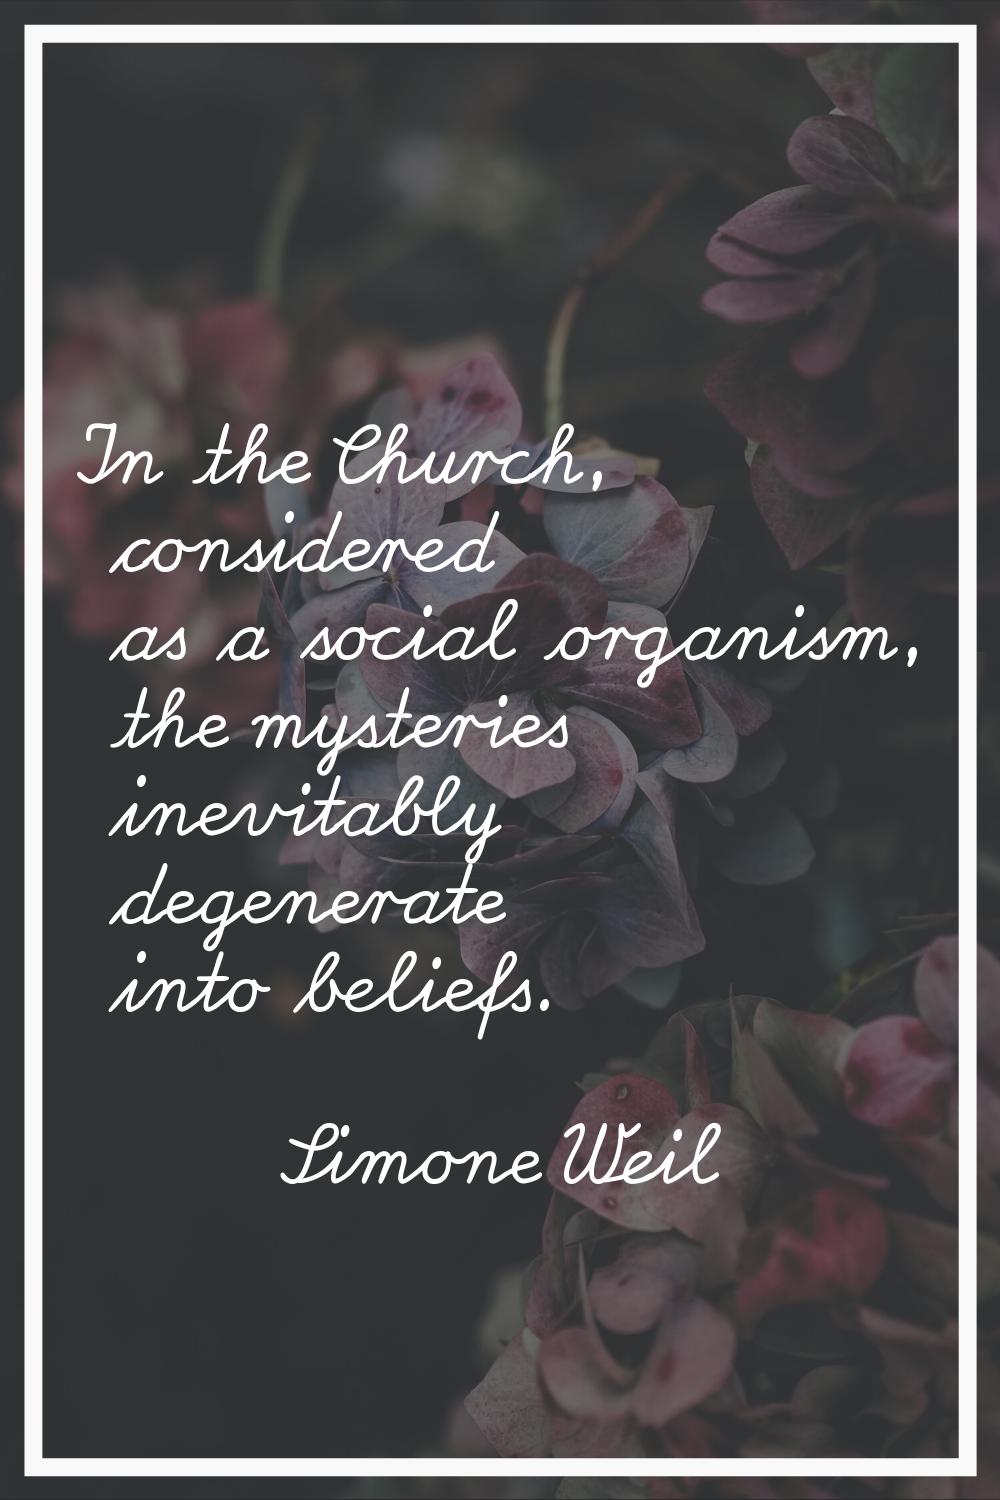 In the Church, considered as a social organism, the mysteries inevitably degenerate into beliefs.